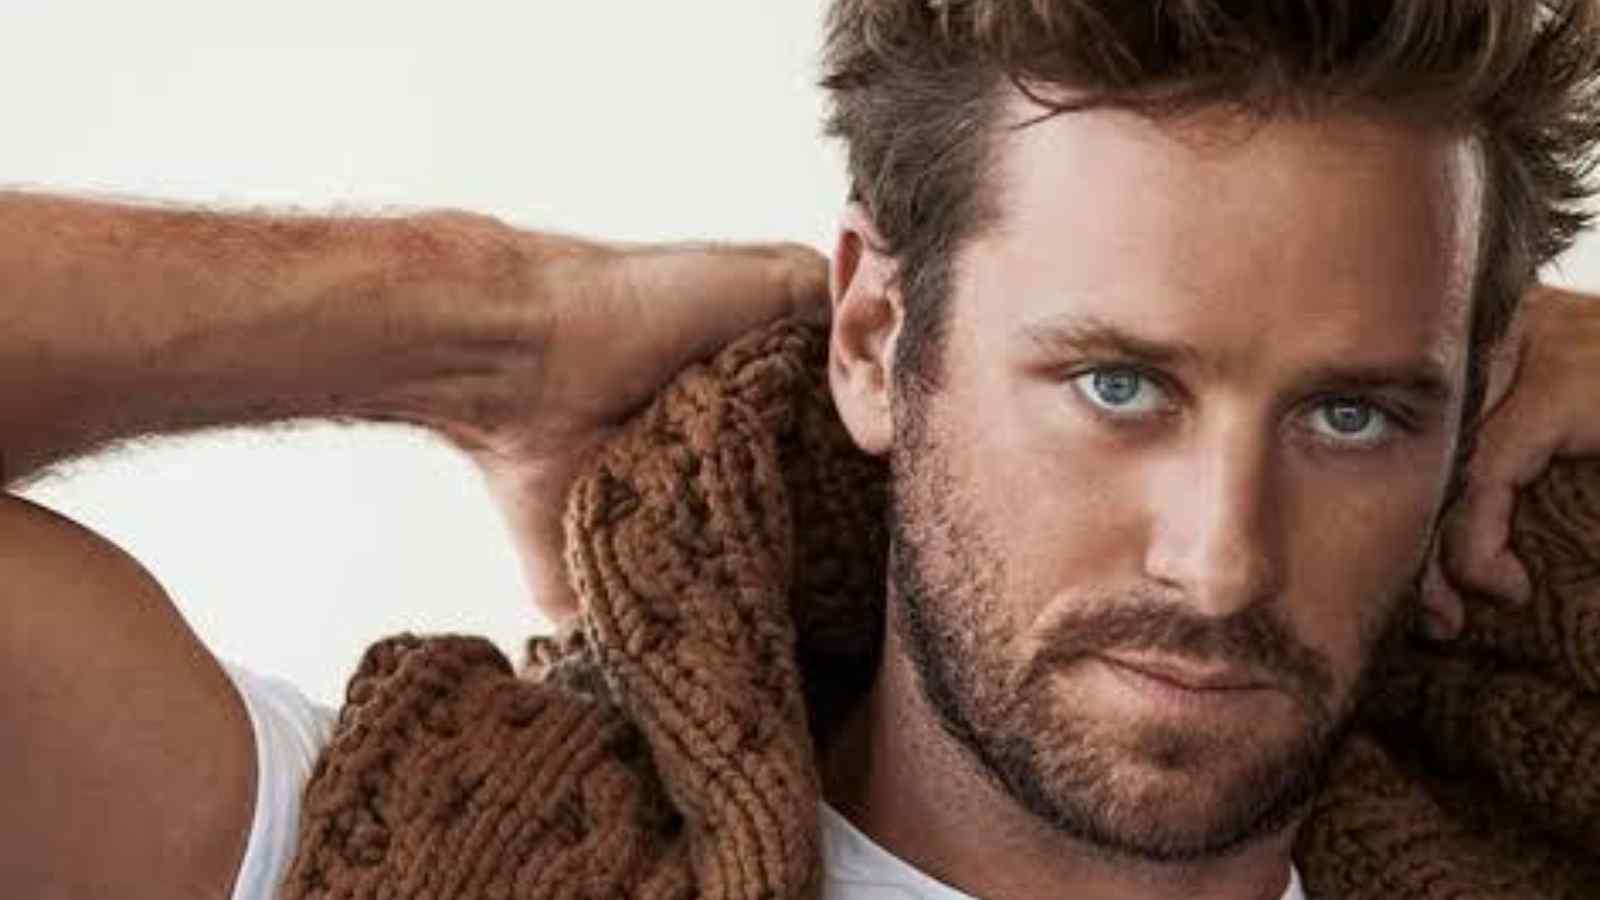 Armie Hammer's stay at the Florida rehab was financially supported by Robert Downey Jr.